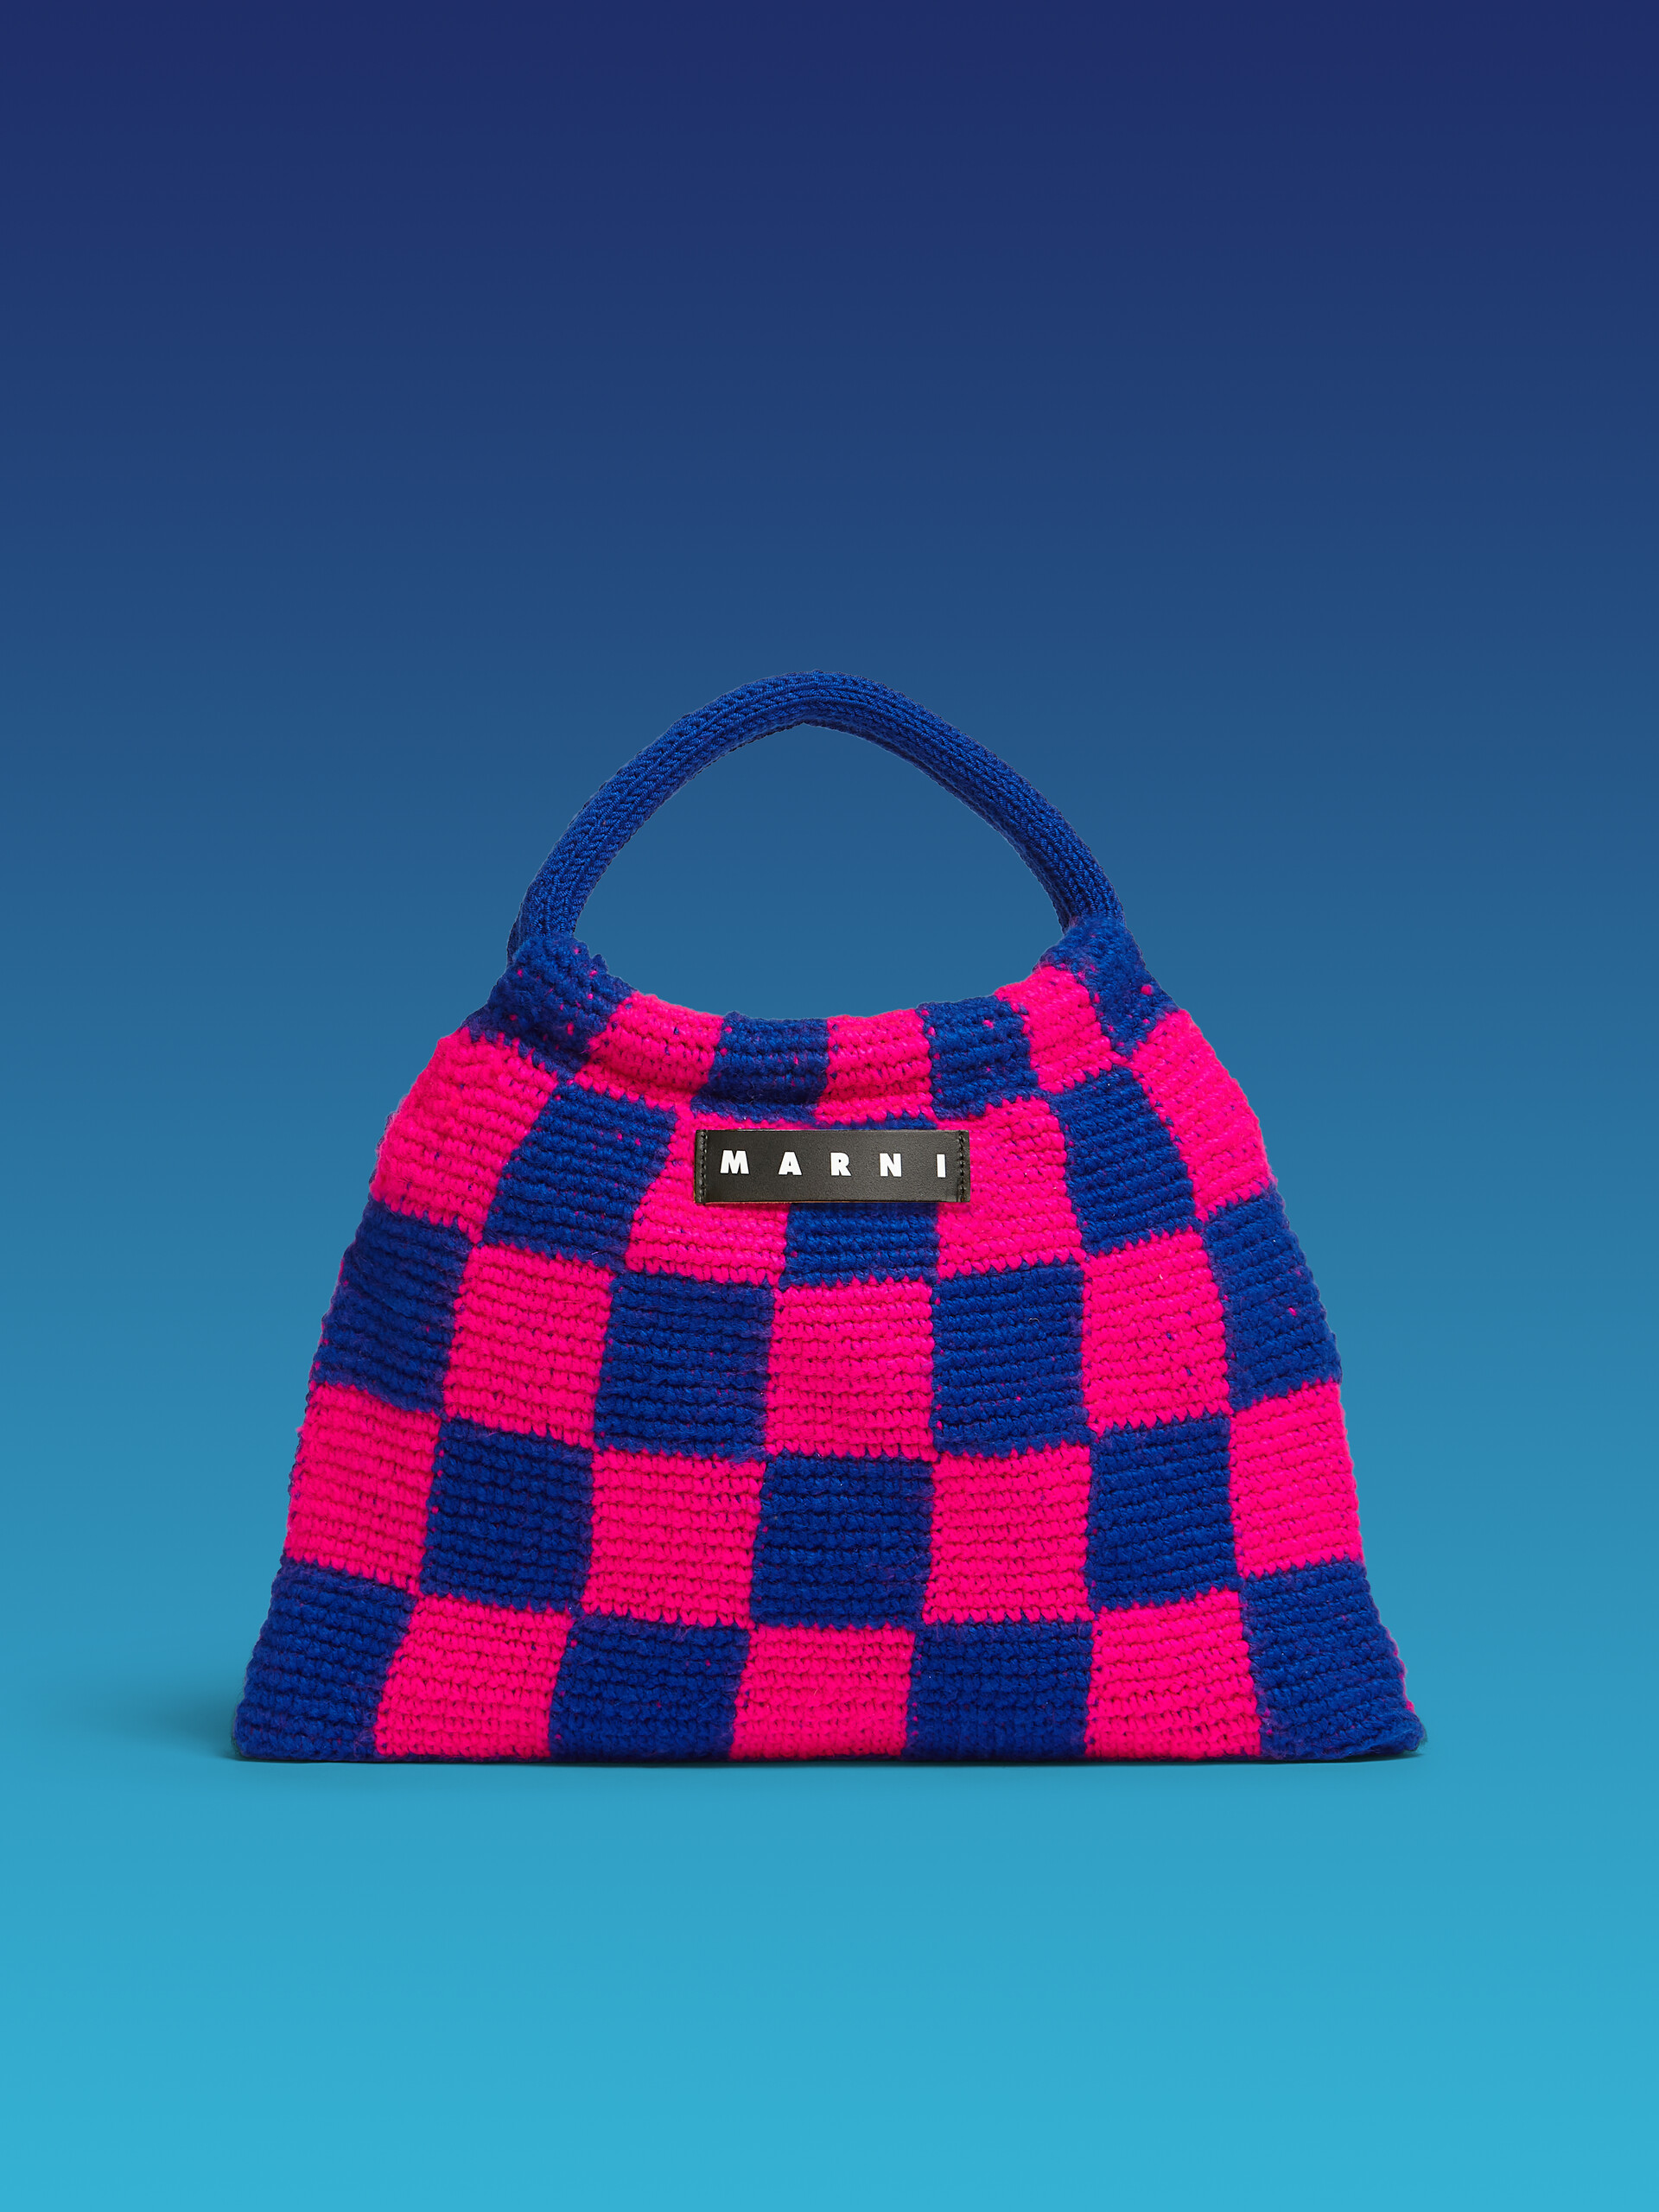 MARNI MARKET GRANNY bag in pink and blue crochet - Shopping Bags - Image 1